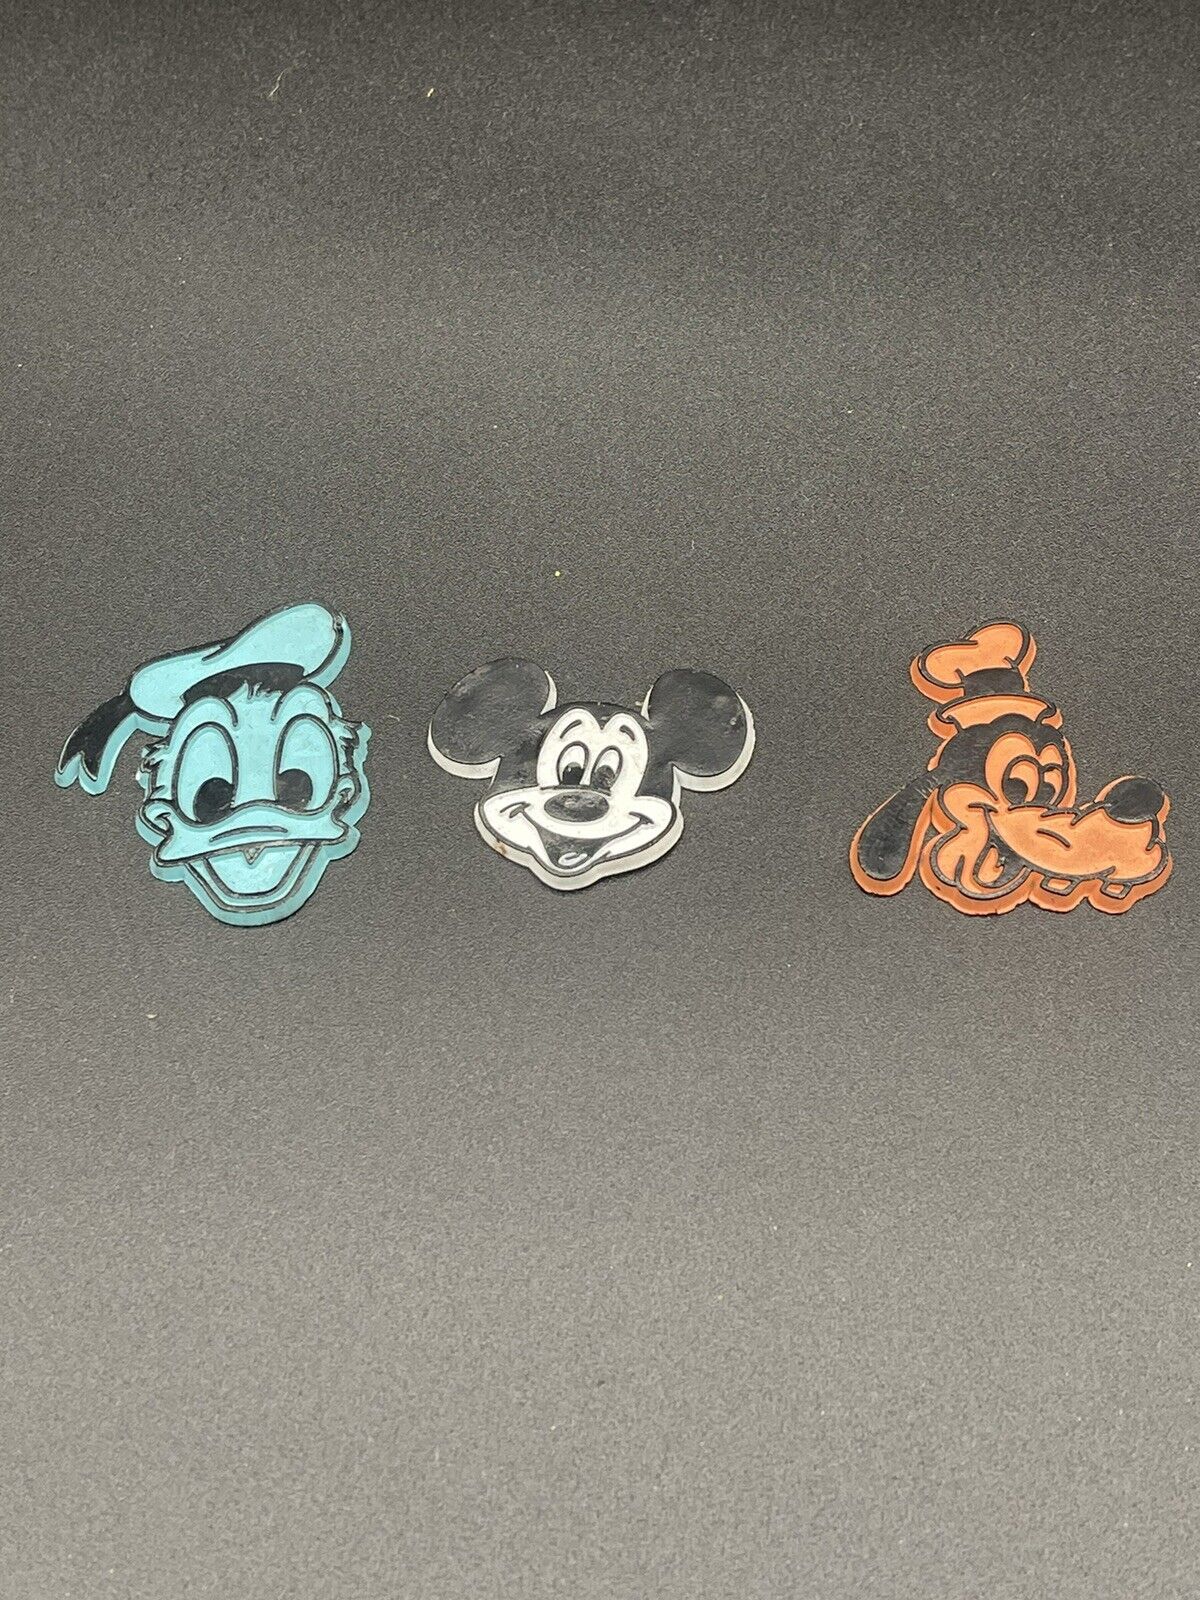 Vintage 80s Disney Lot of 3 Mickey Goofy Donald Duck Rubber Refrigerator Magnets